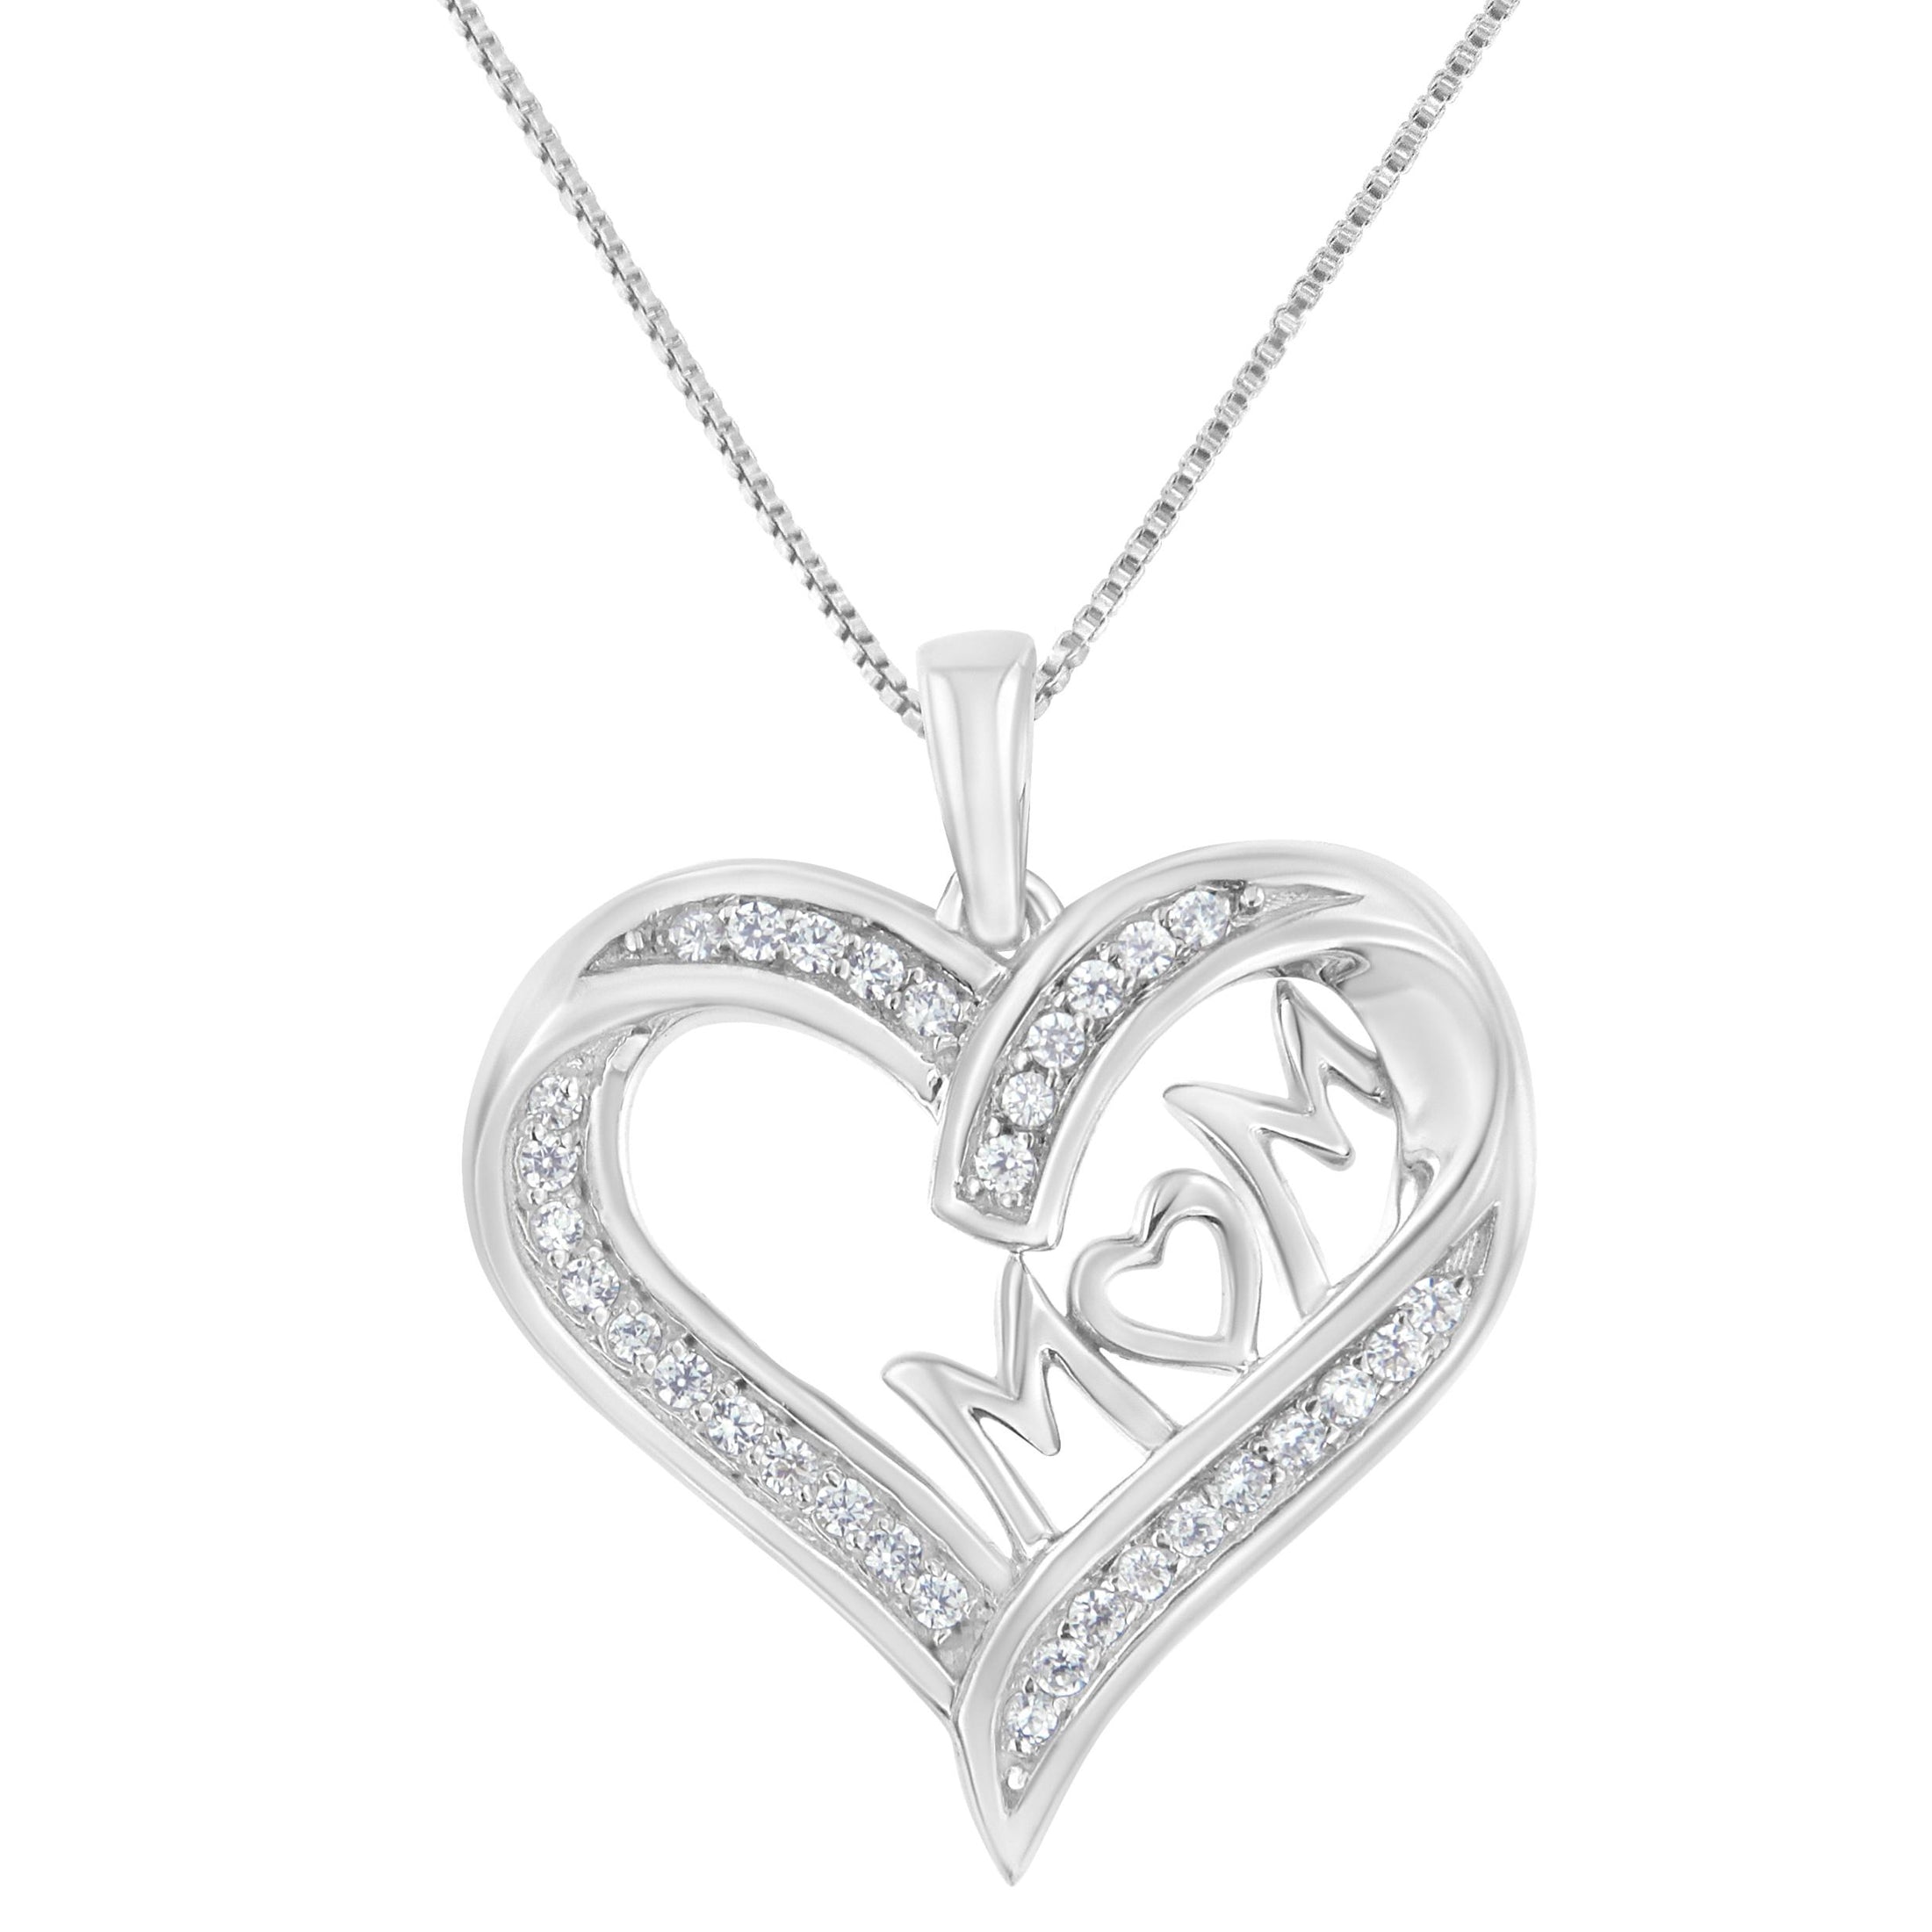 .925 Sterling Silver 1/4 cttw Diamond Engraved "Mom" in Heart Pendant Necklace